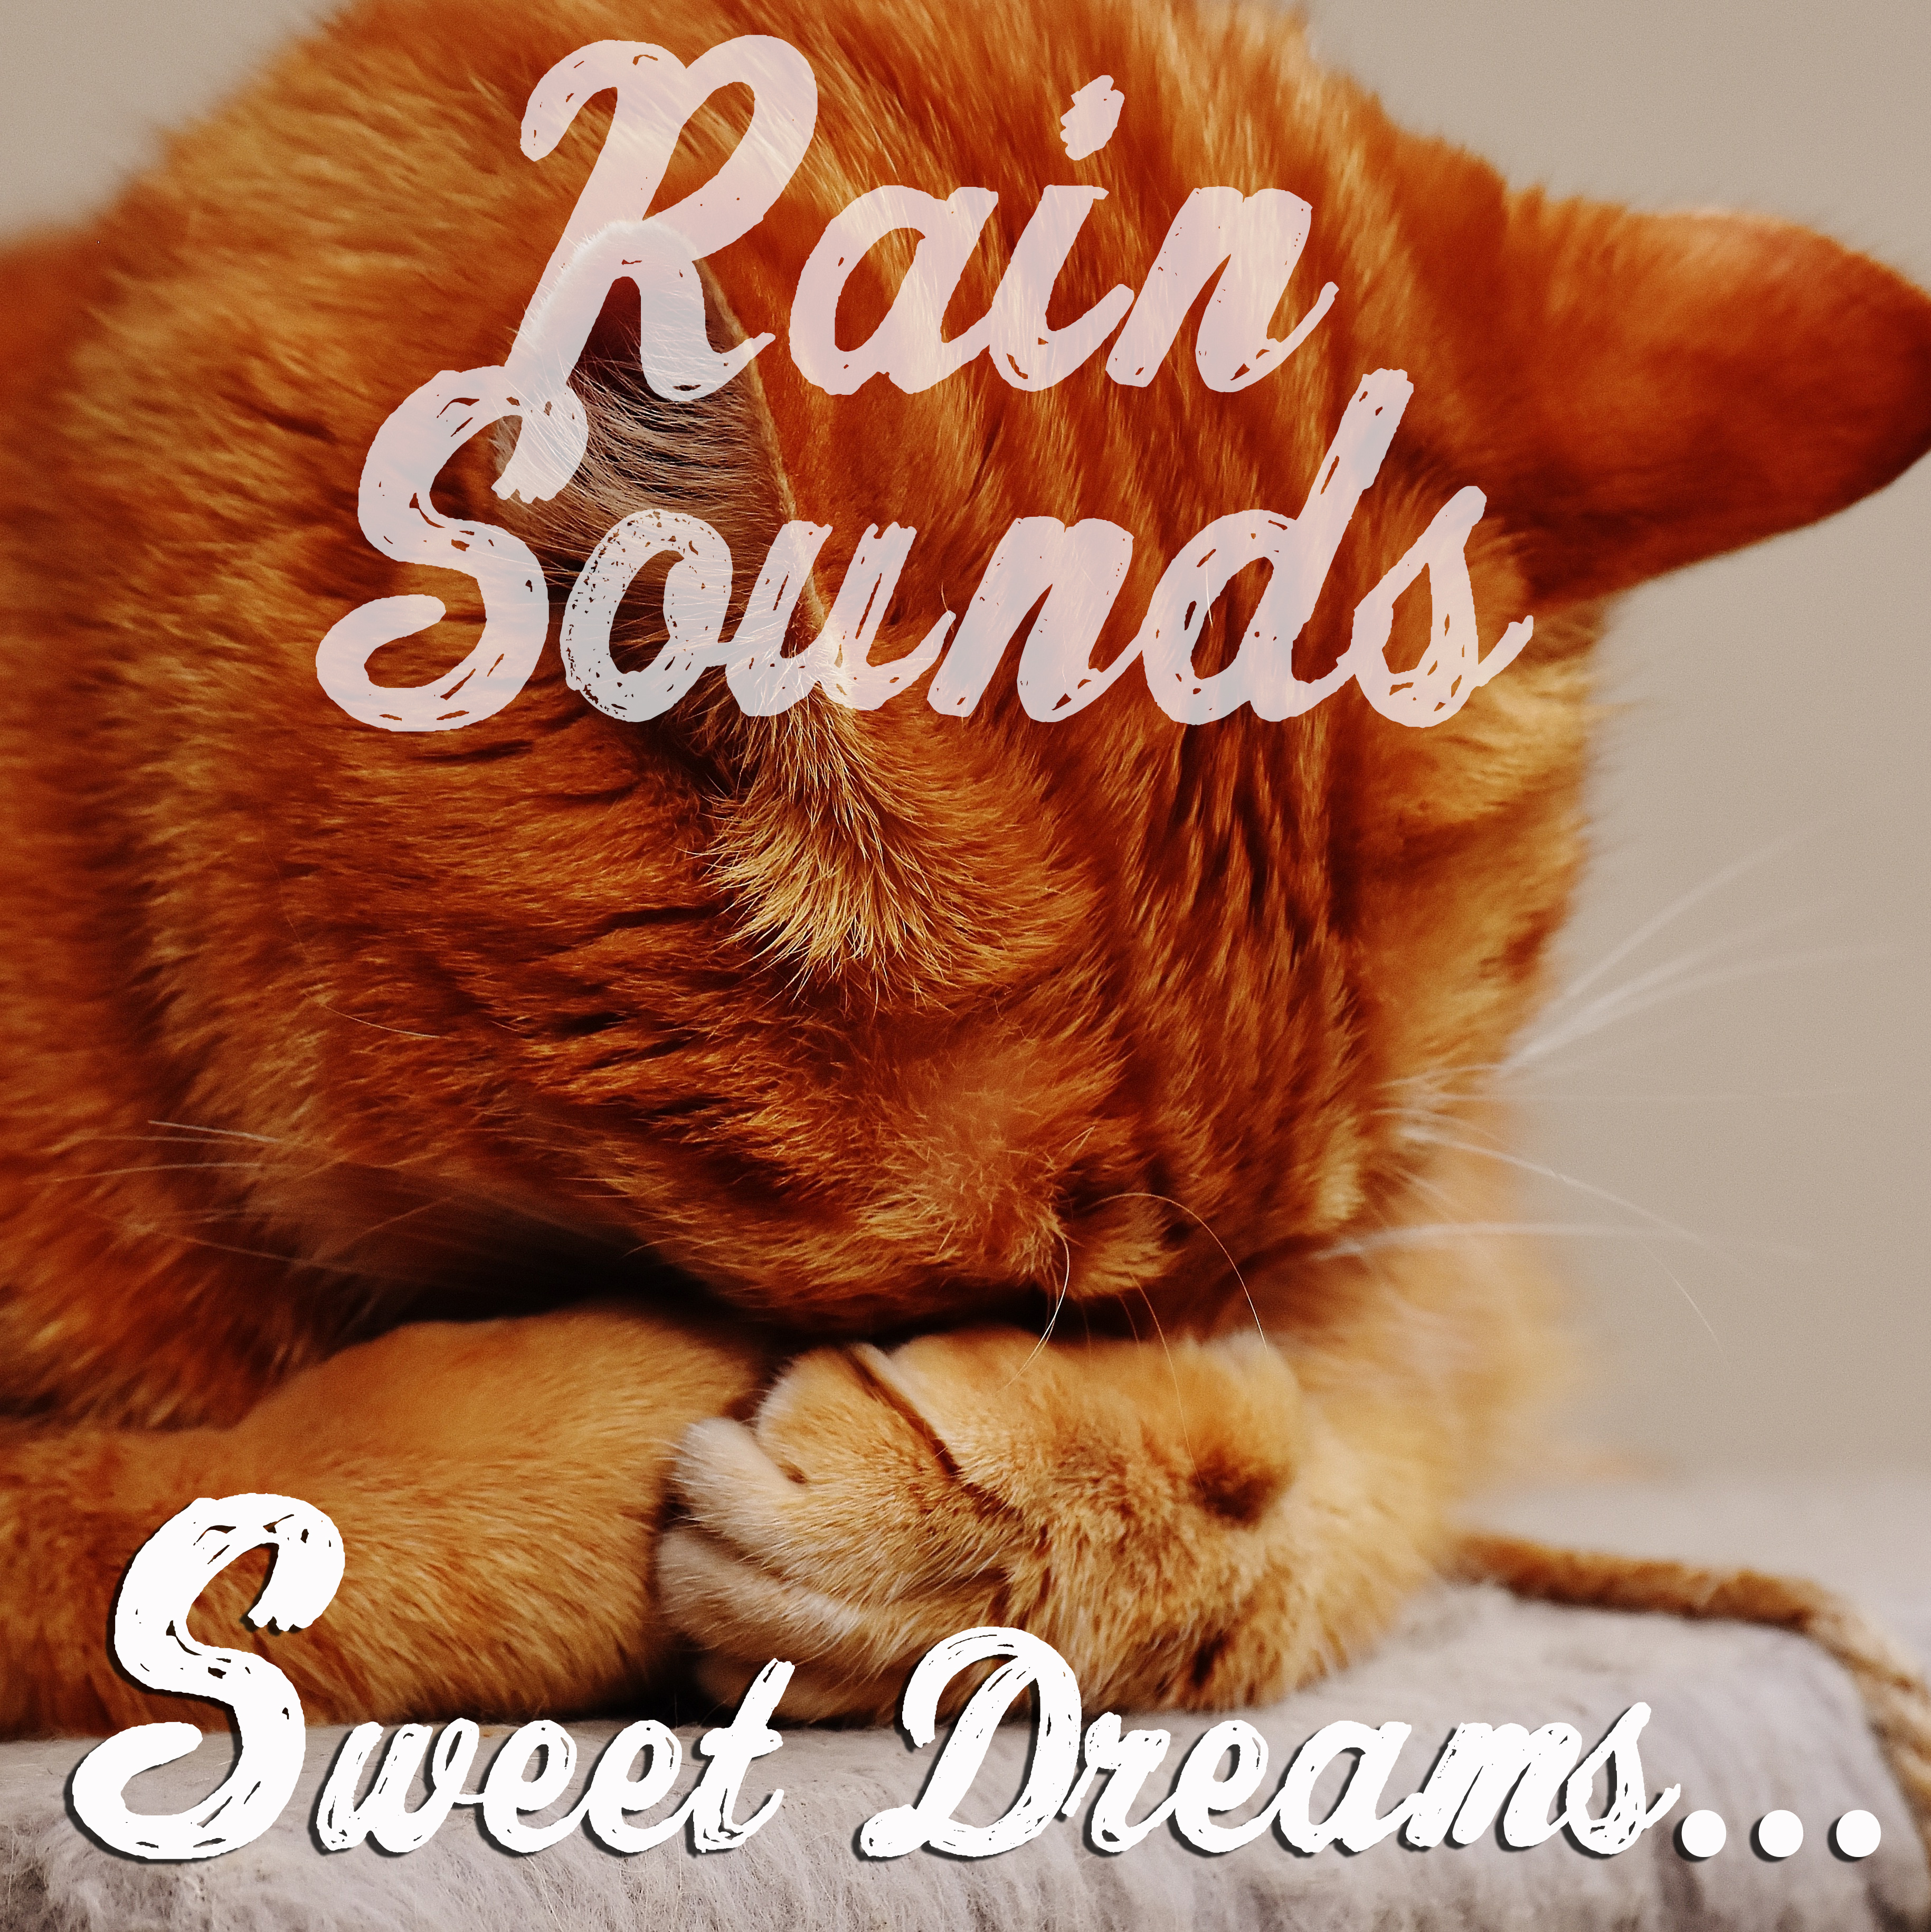 12 of the Best Rain and Nature Sounds. A Compilation for Looping and Playlisting for Sleep